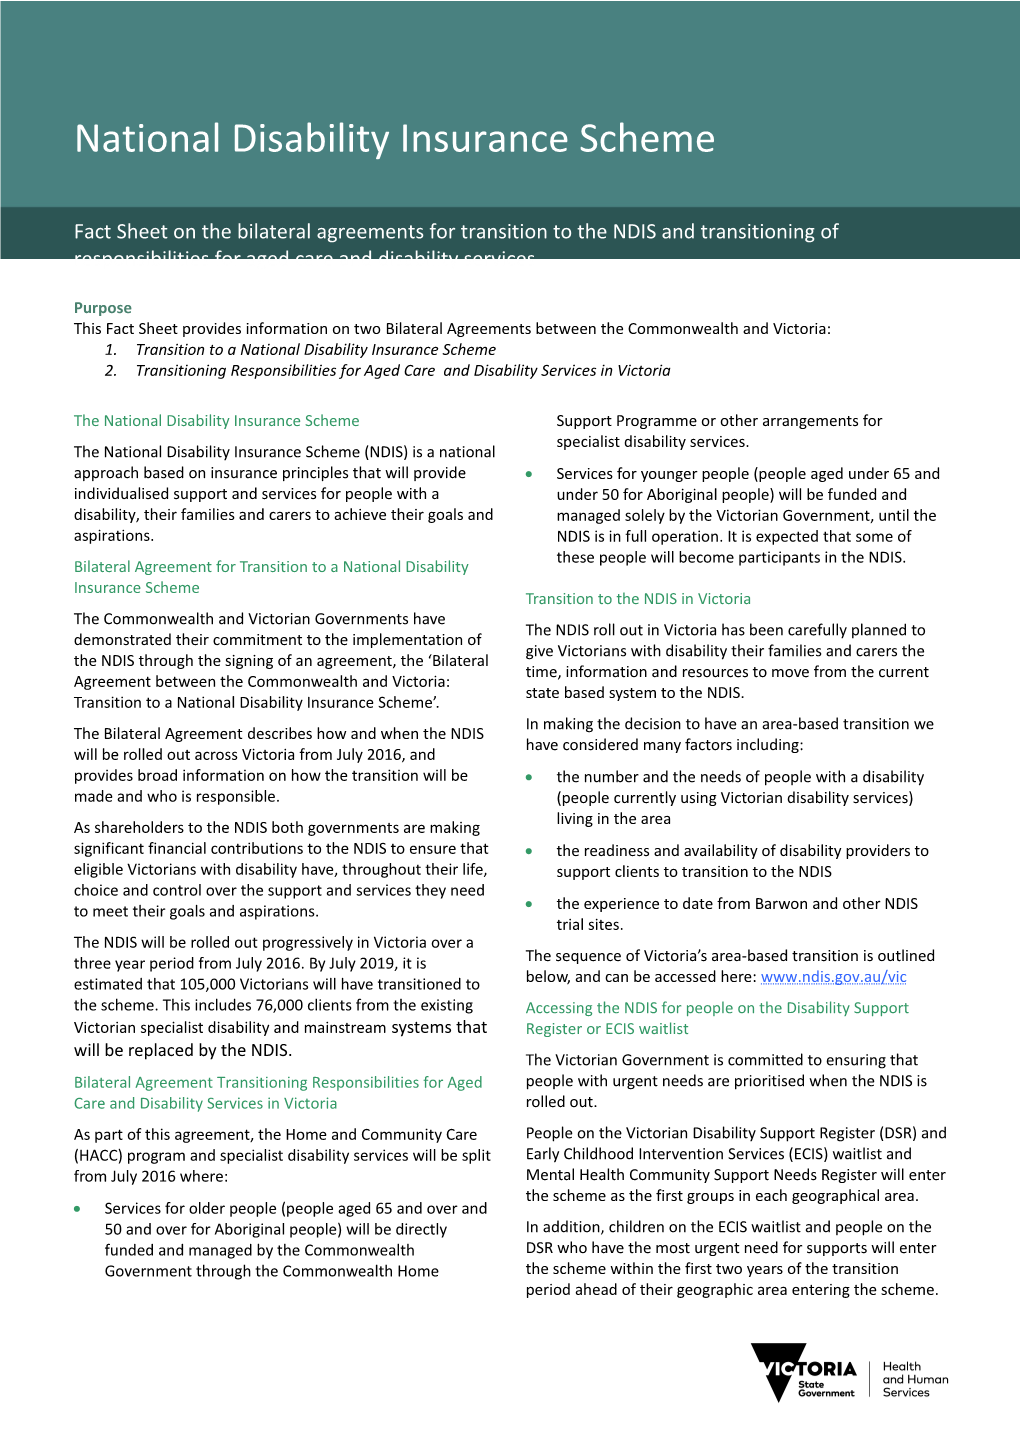 National Disability Insurance Scheme - Fact Sheet On The Bilateral Agreements For Transition To The NDIS And Transitioning Of Responsibilities For Aged Care And Disability Services